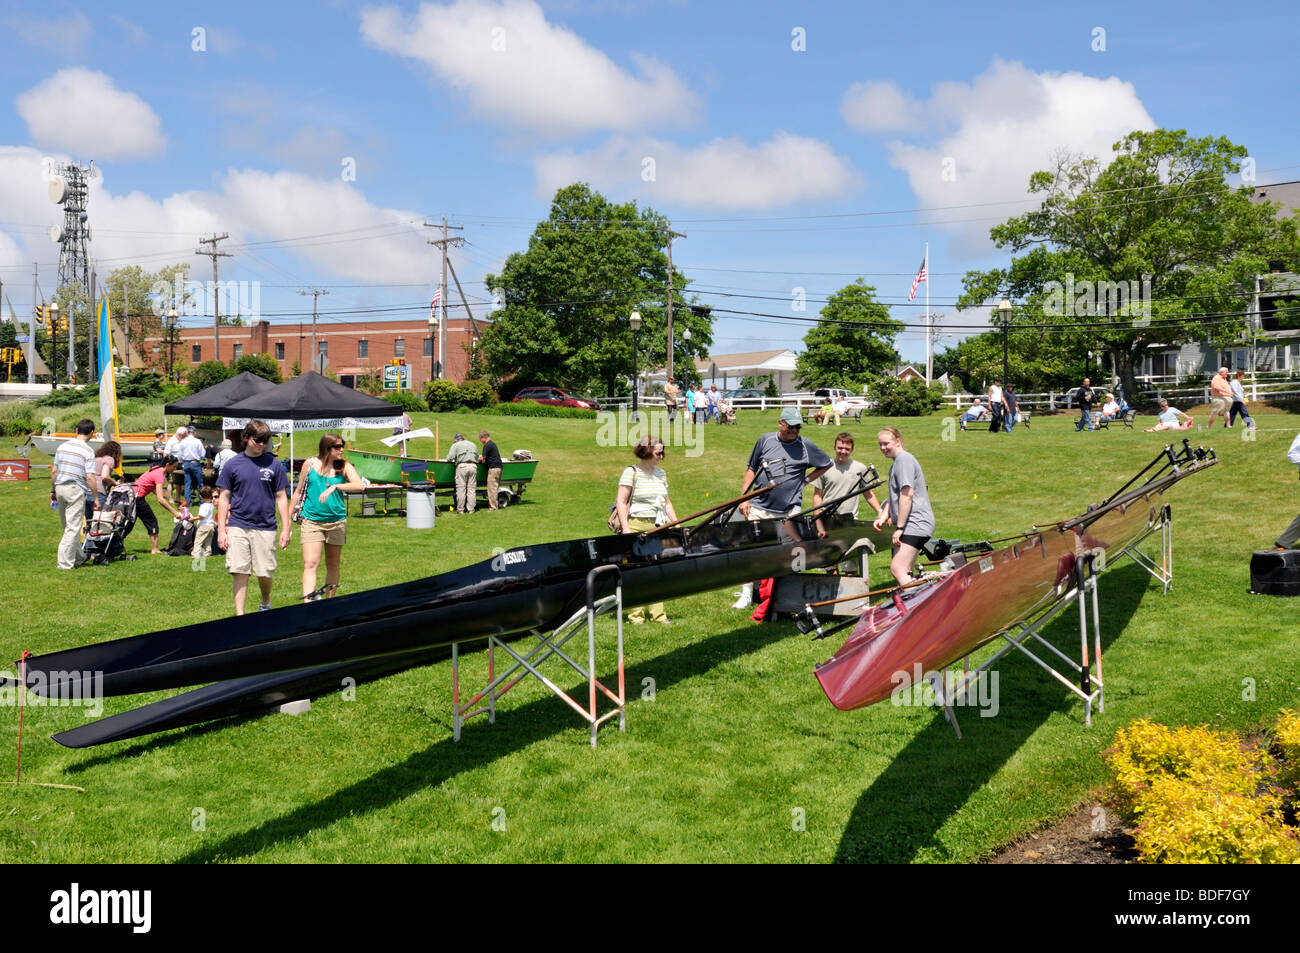 People looking at rowing shells on display at outdoor festival in Hyannis, Cape Cod in summer Stock Photo